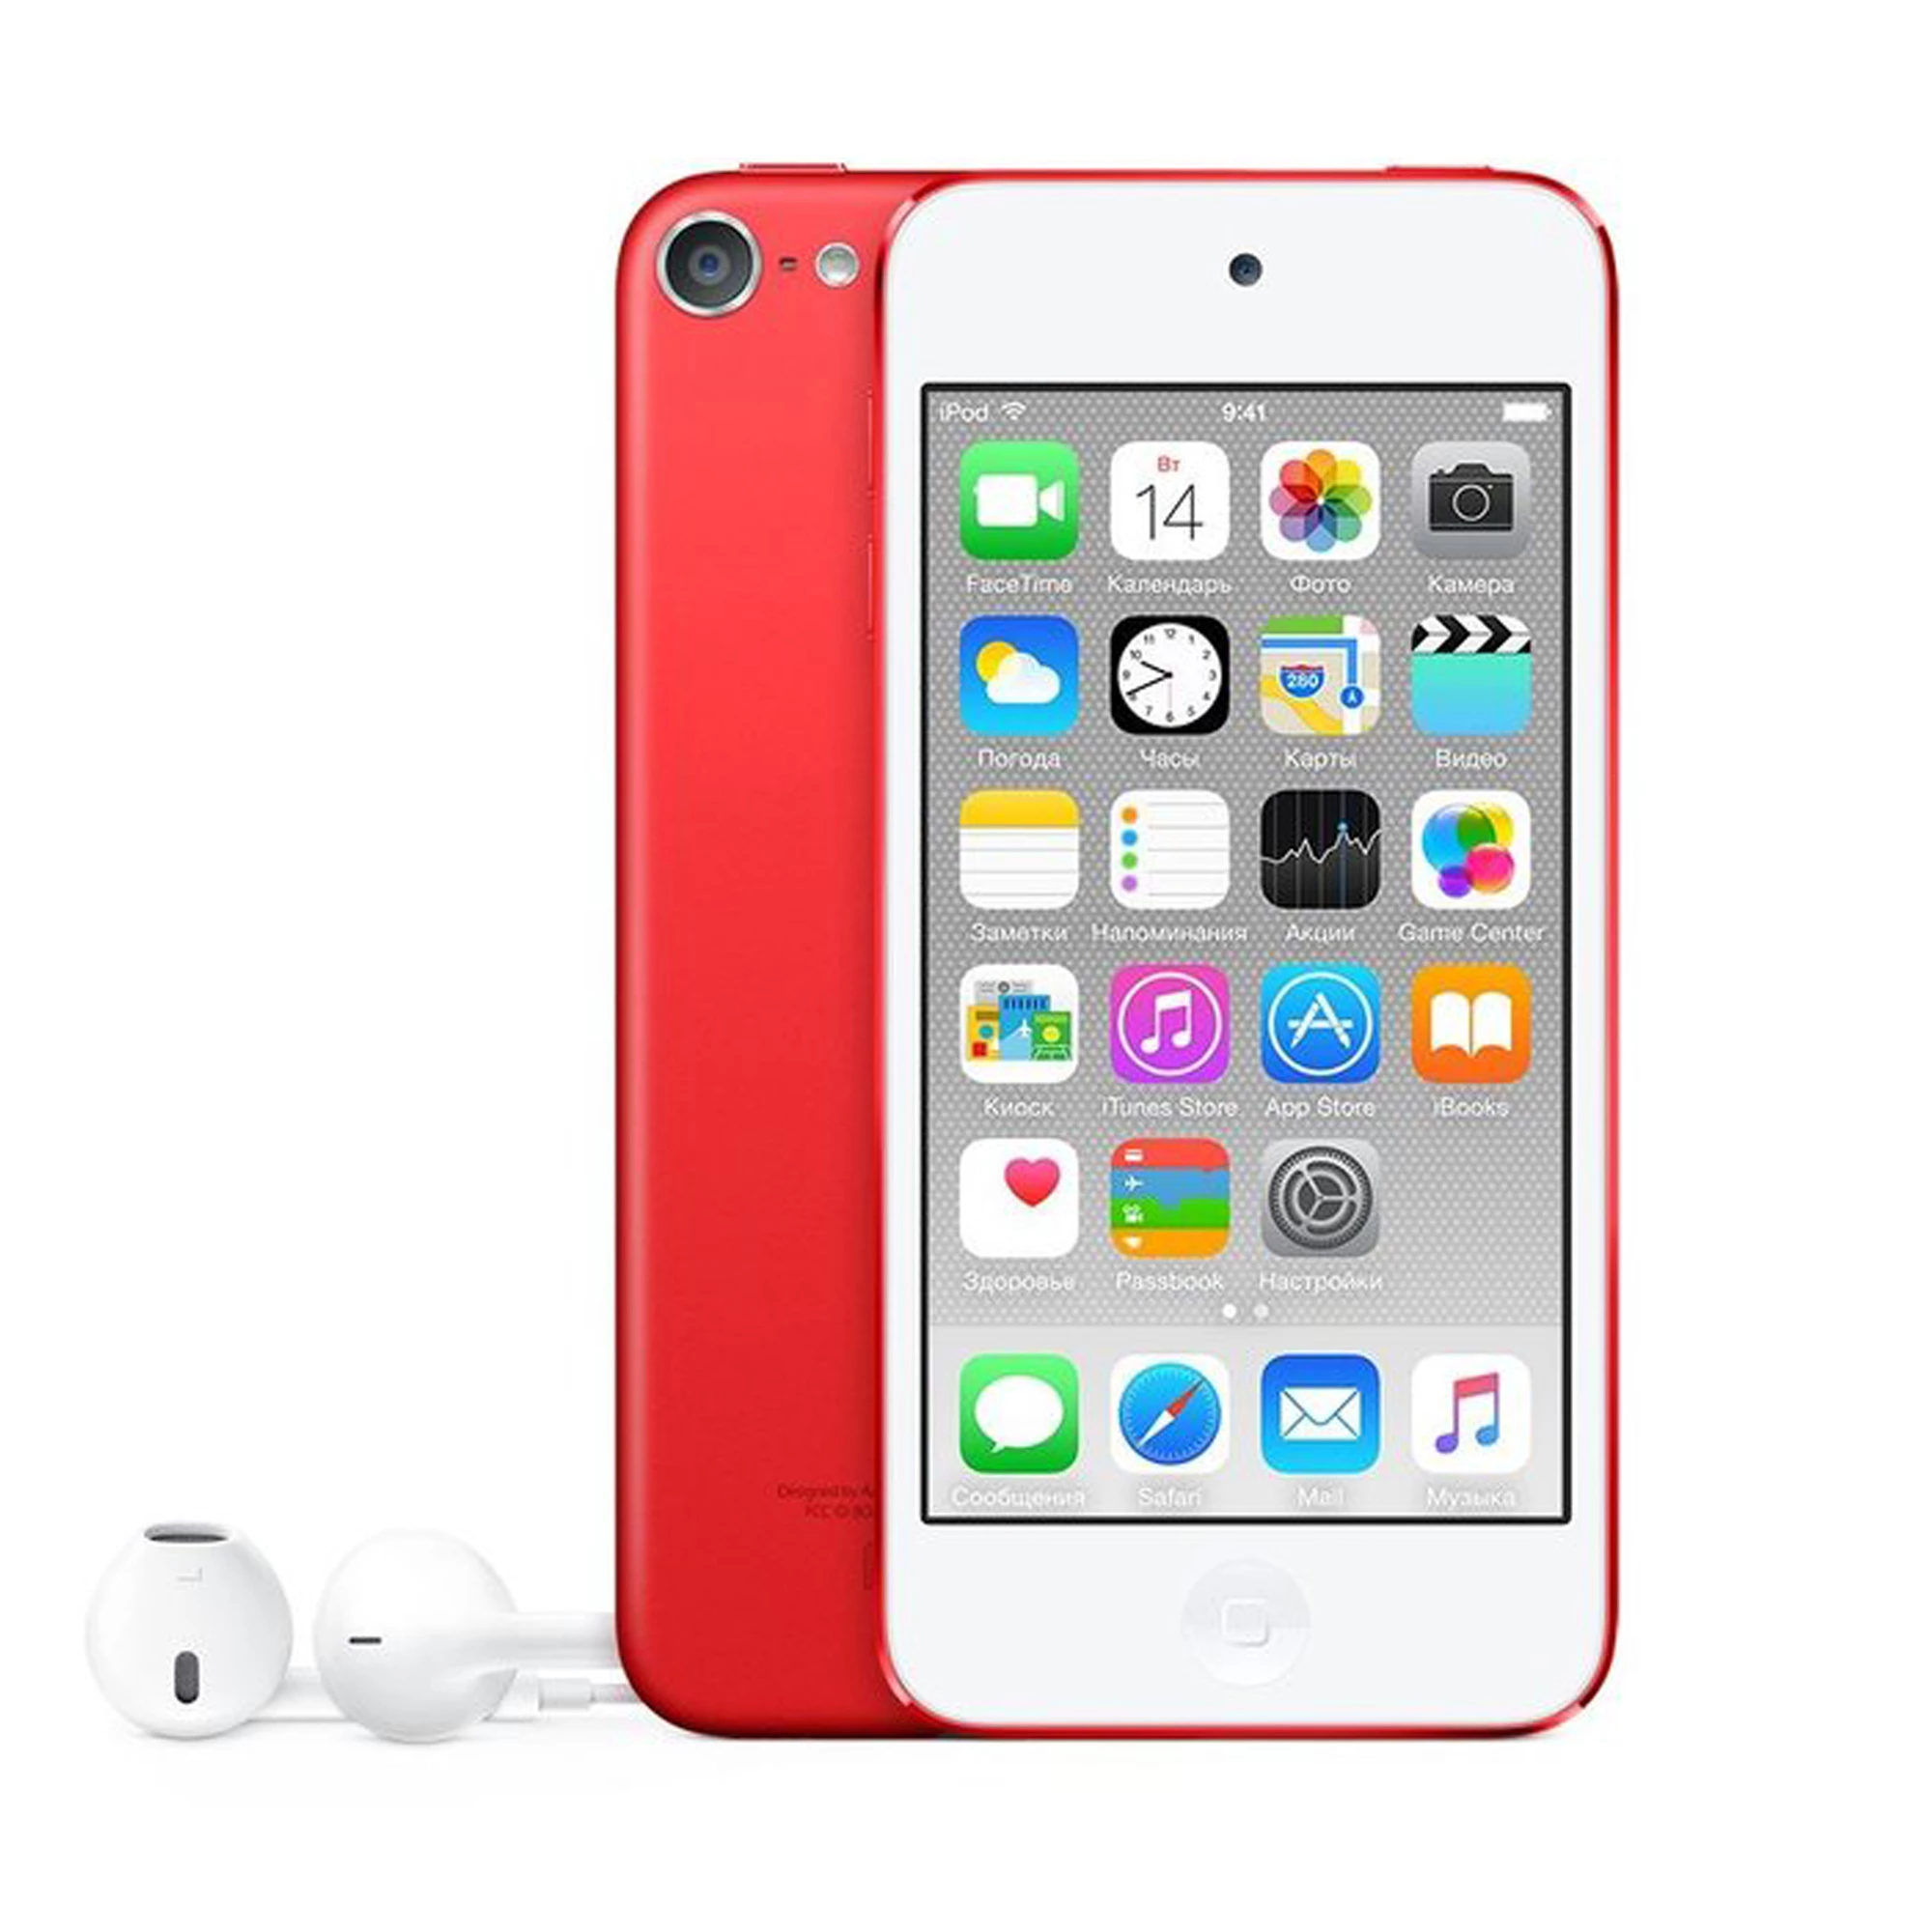 iPod touch 6Gen 64GB Red